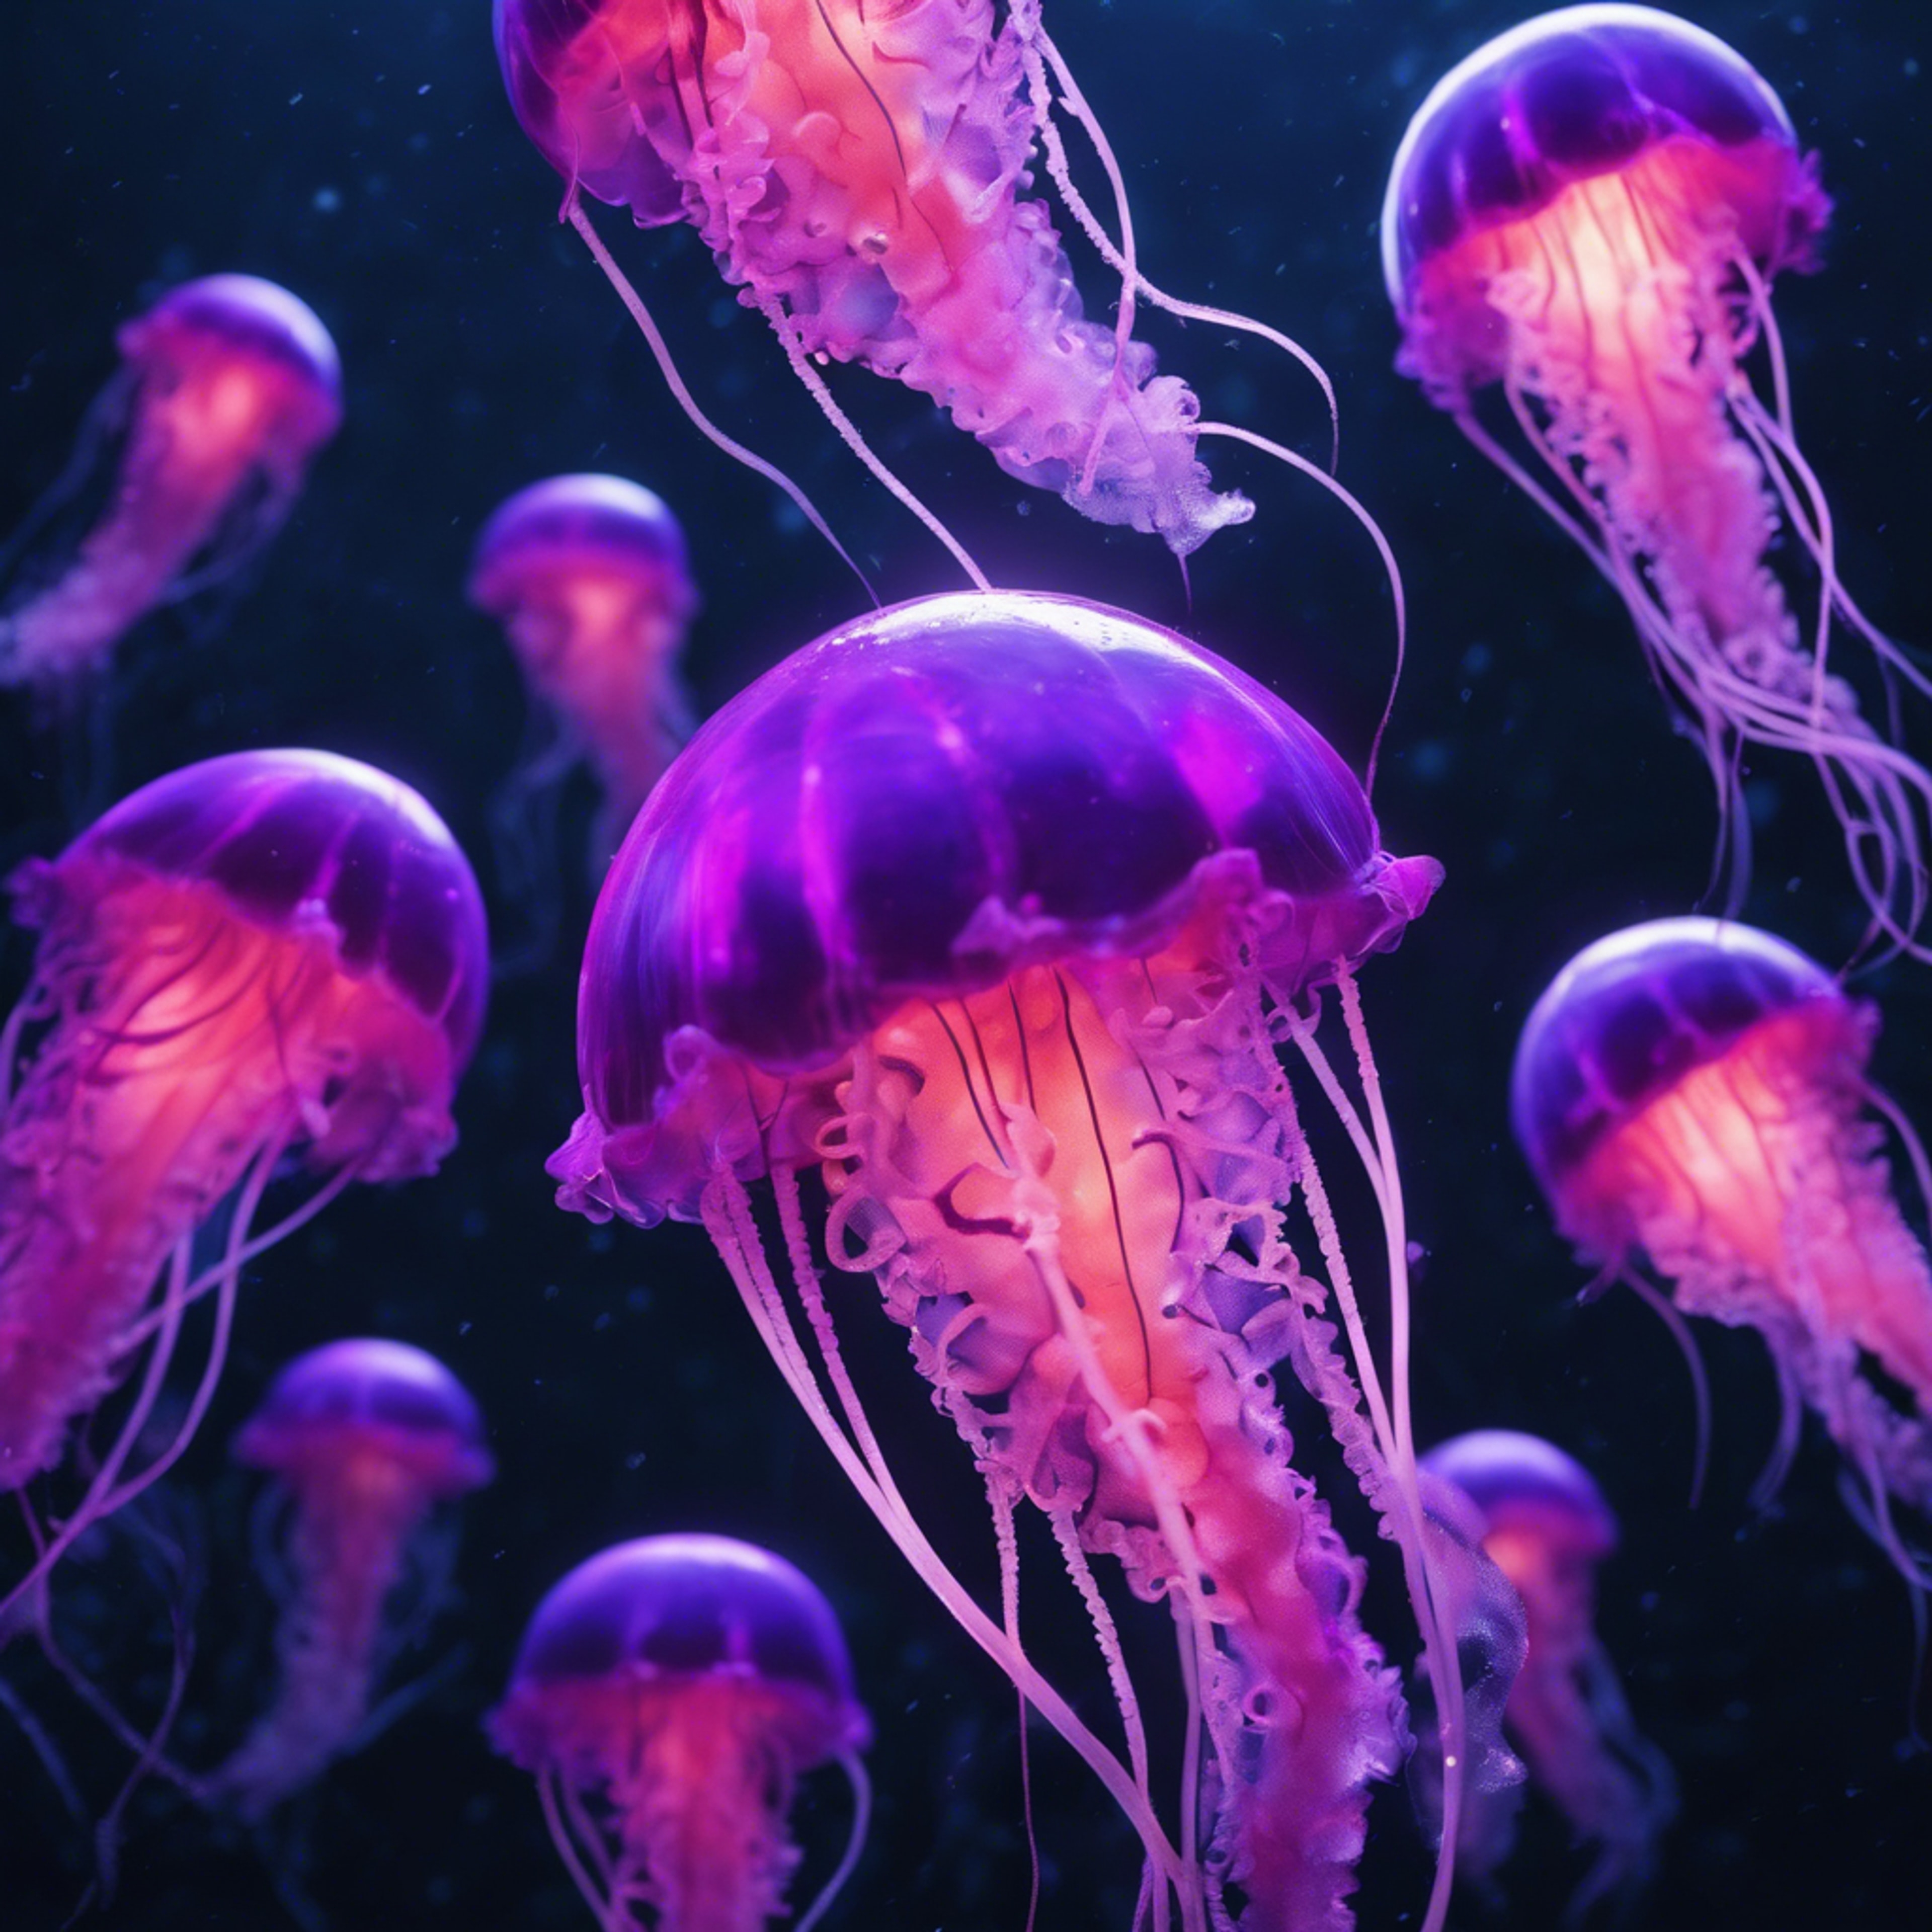 An array of neon purple jellyfish gracefully floating in the cool, dark depths of the ocean. Валлпапер[2e15e39636af455f837d]